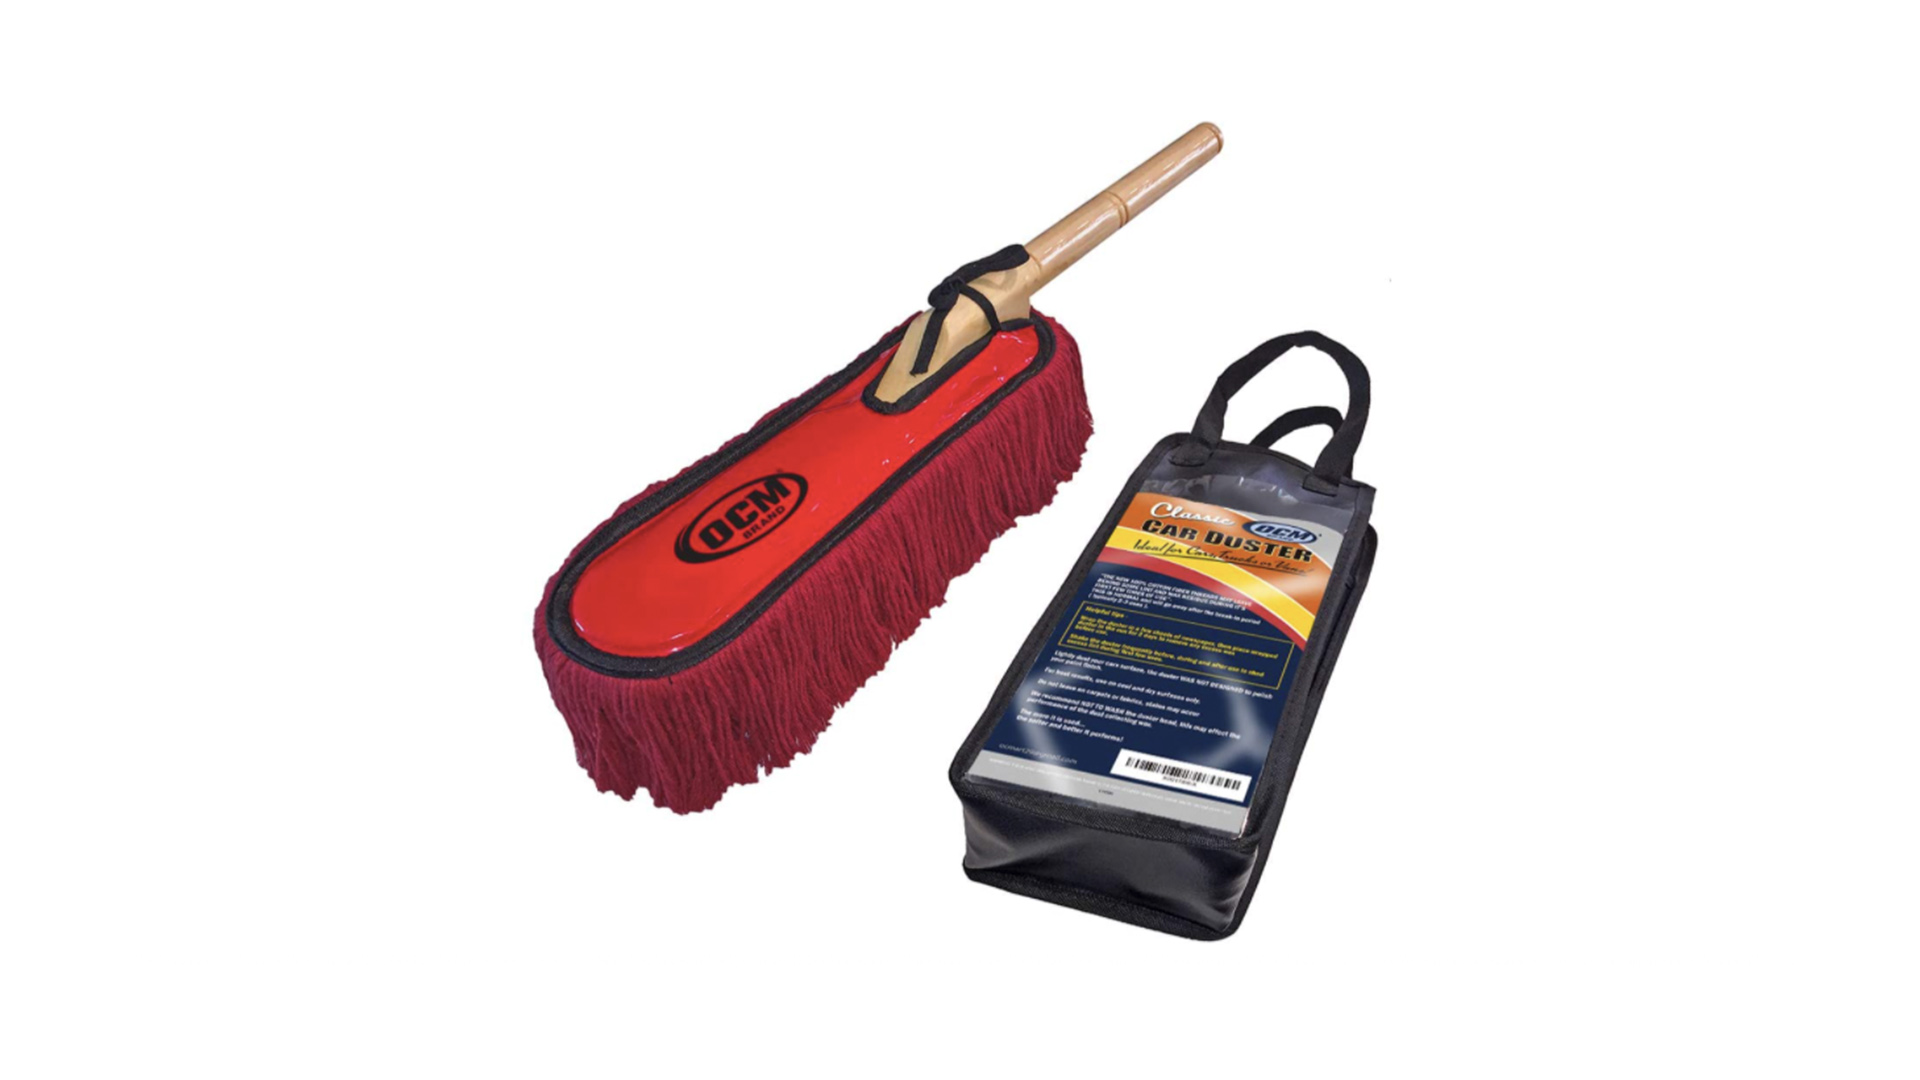  Car Duster Exterior Scratch Free,Car Dusters